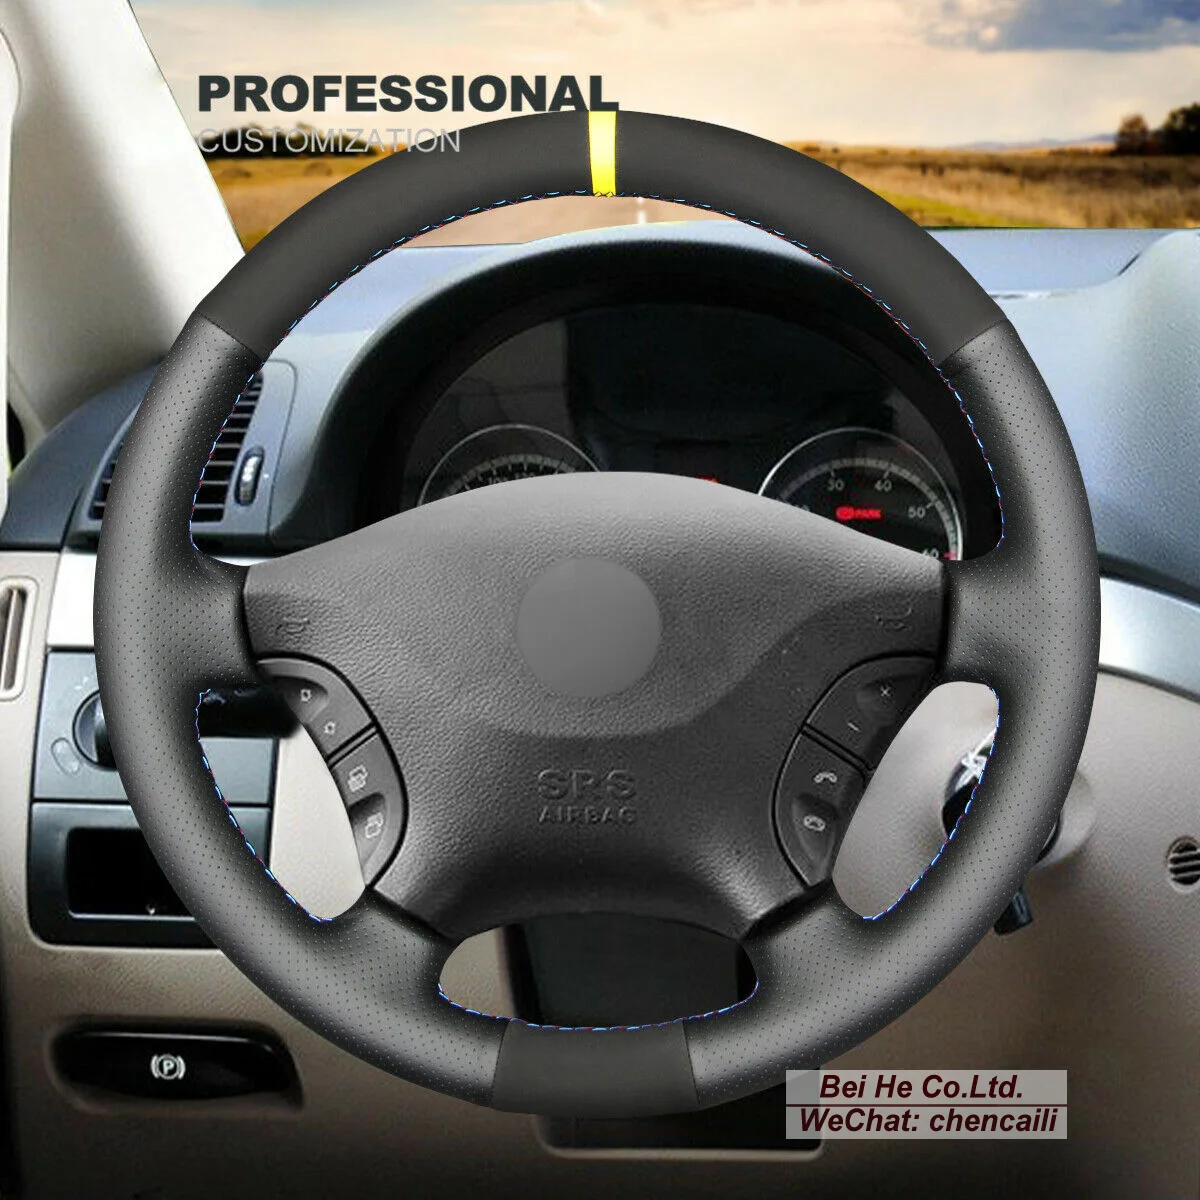 

Hand-stitched Black Leather Suede Steering Wheel Cover Wrap For Mercedes Benz W639 Viano 2006-2011 / Vito 2010-2015